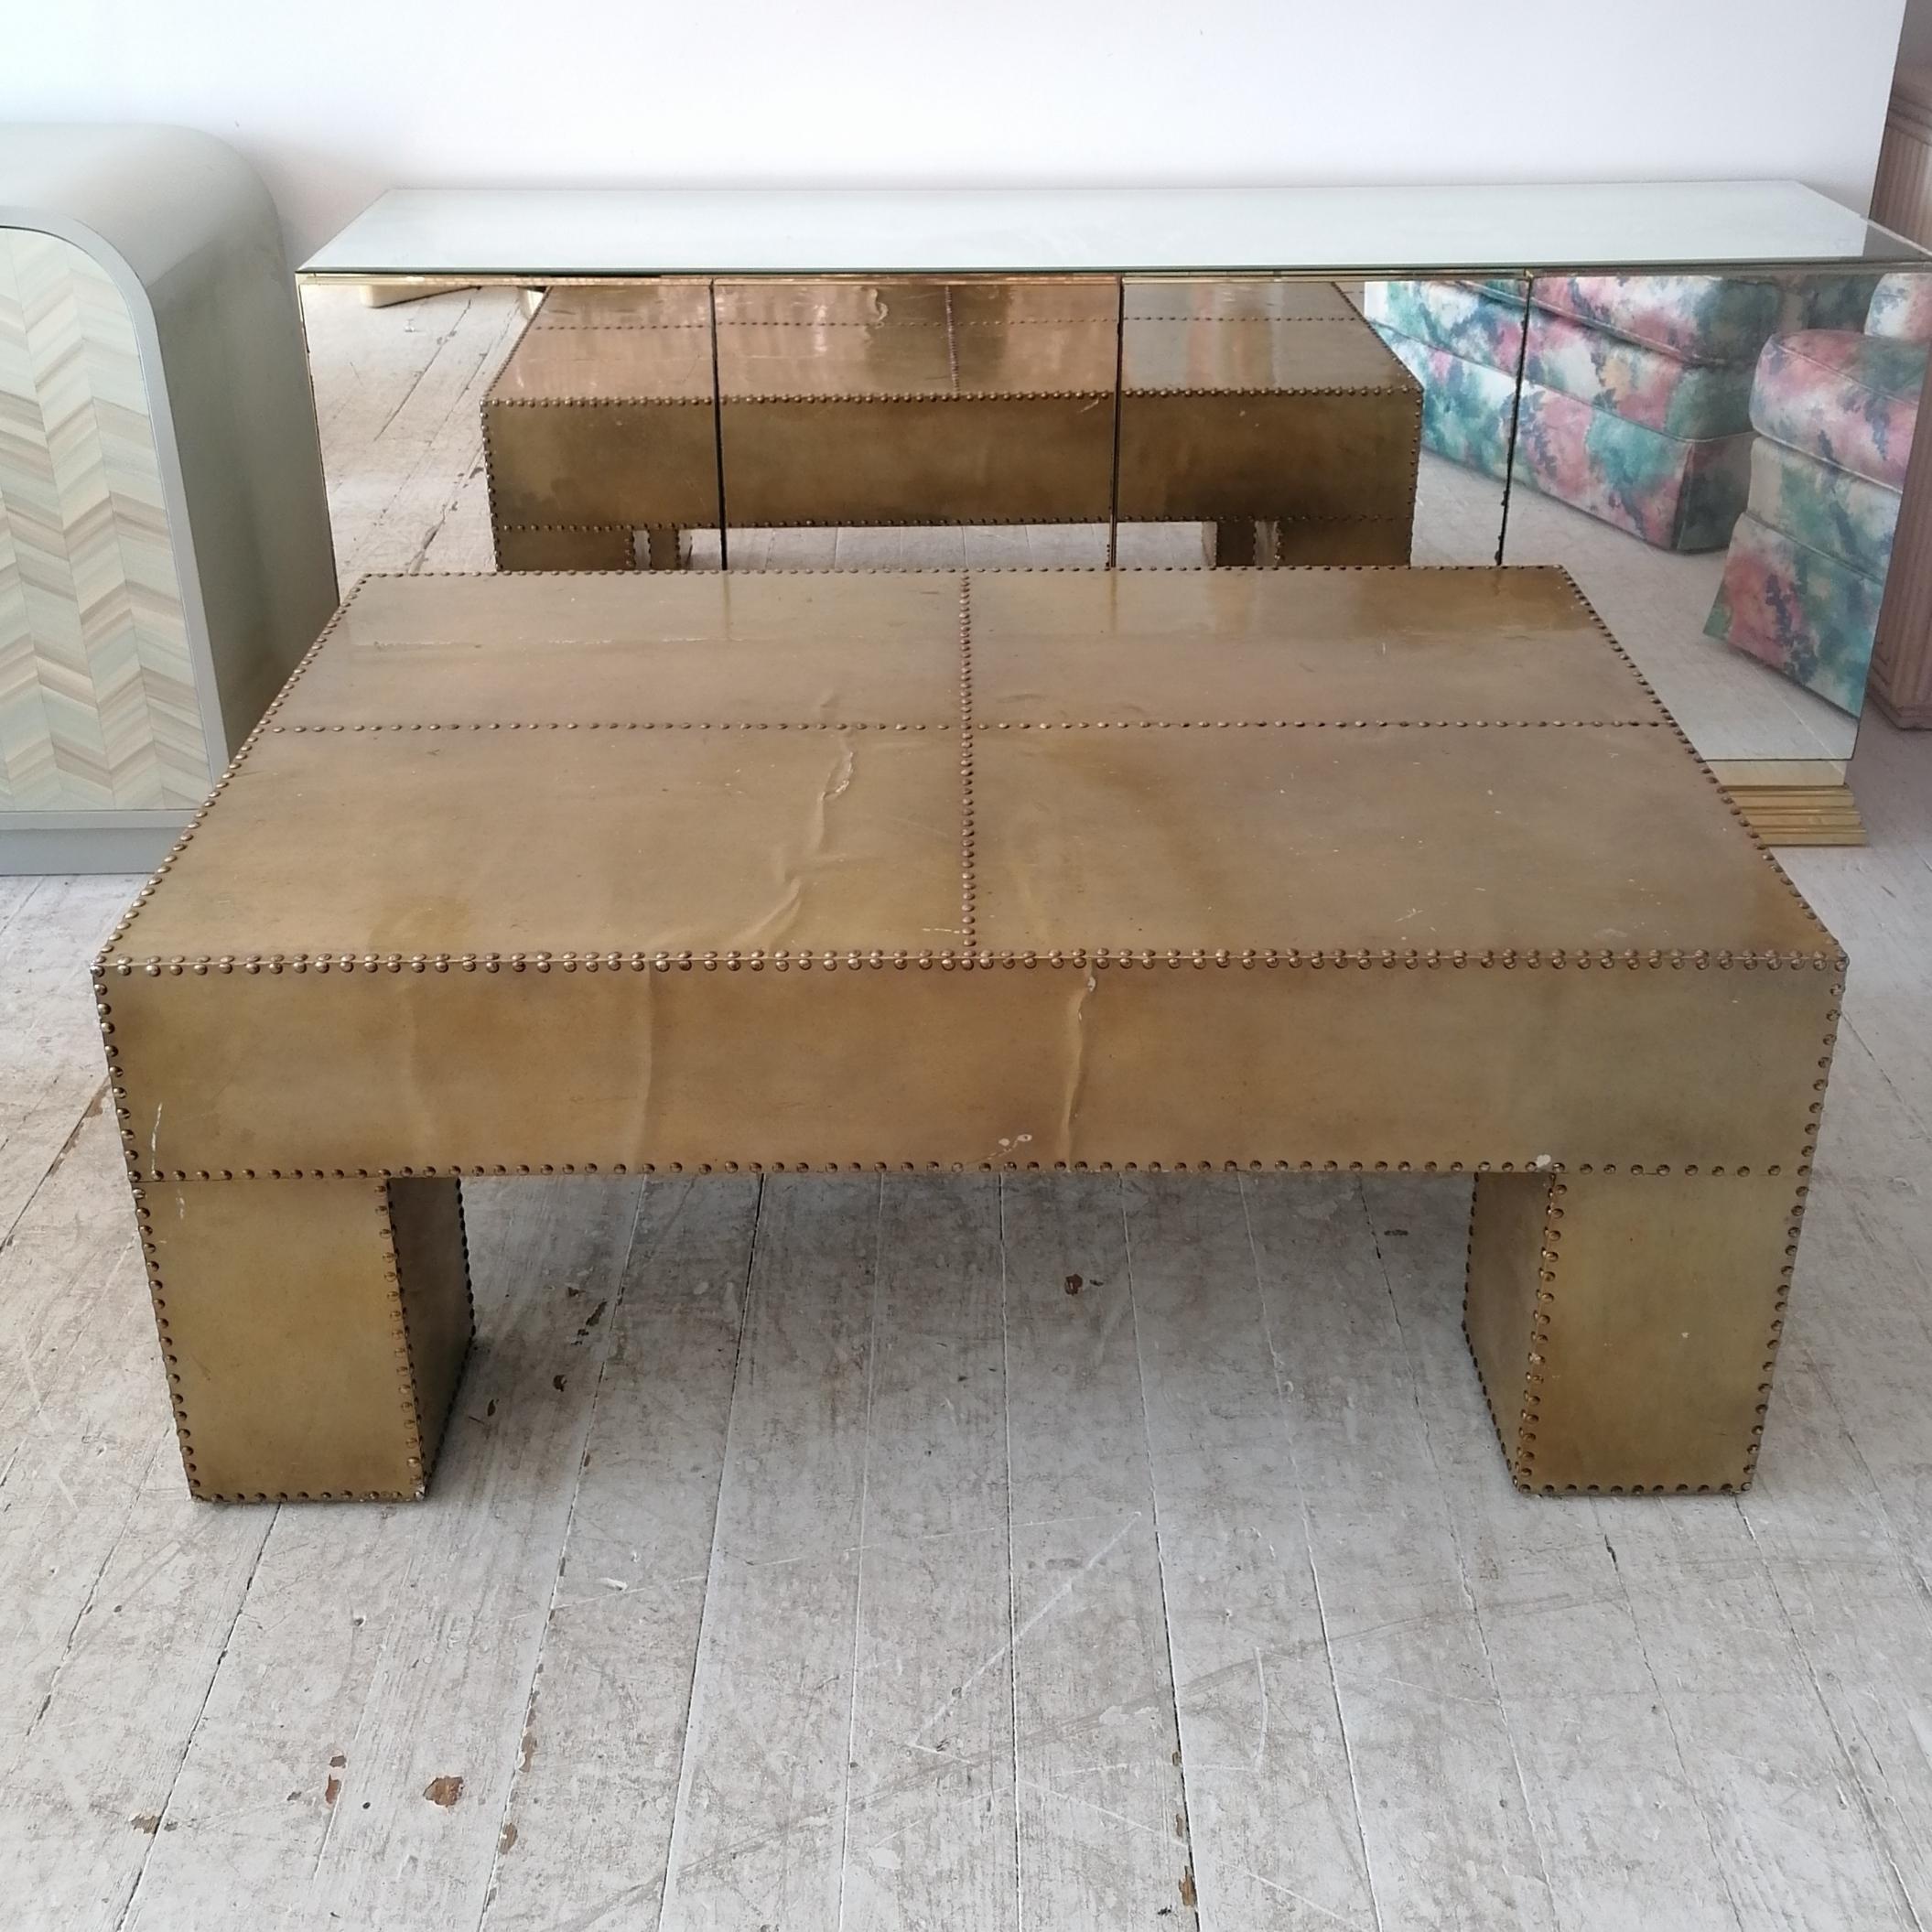 Large Sarreid style coffee table. Clad in brass-coloured aluminium (or possibly nickel?), studded along edges. There's some age-related wear to the brass finish where the aluminium shows through.

Dimensions: width 120.5cm, depth 71cm, height 49.5cm